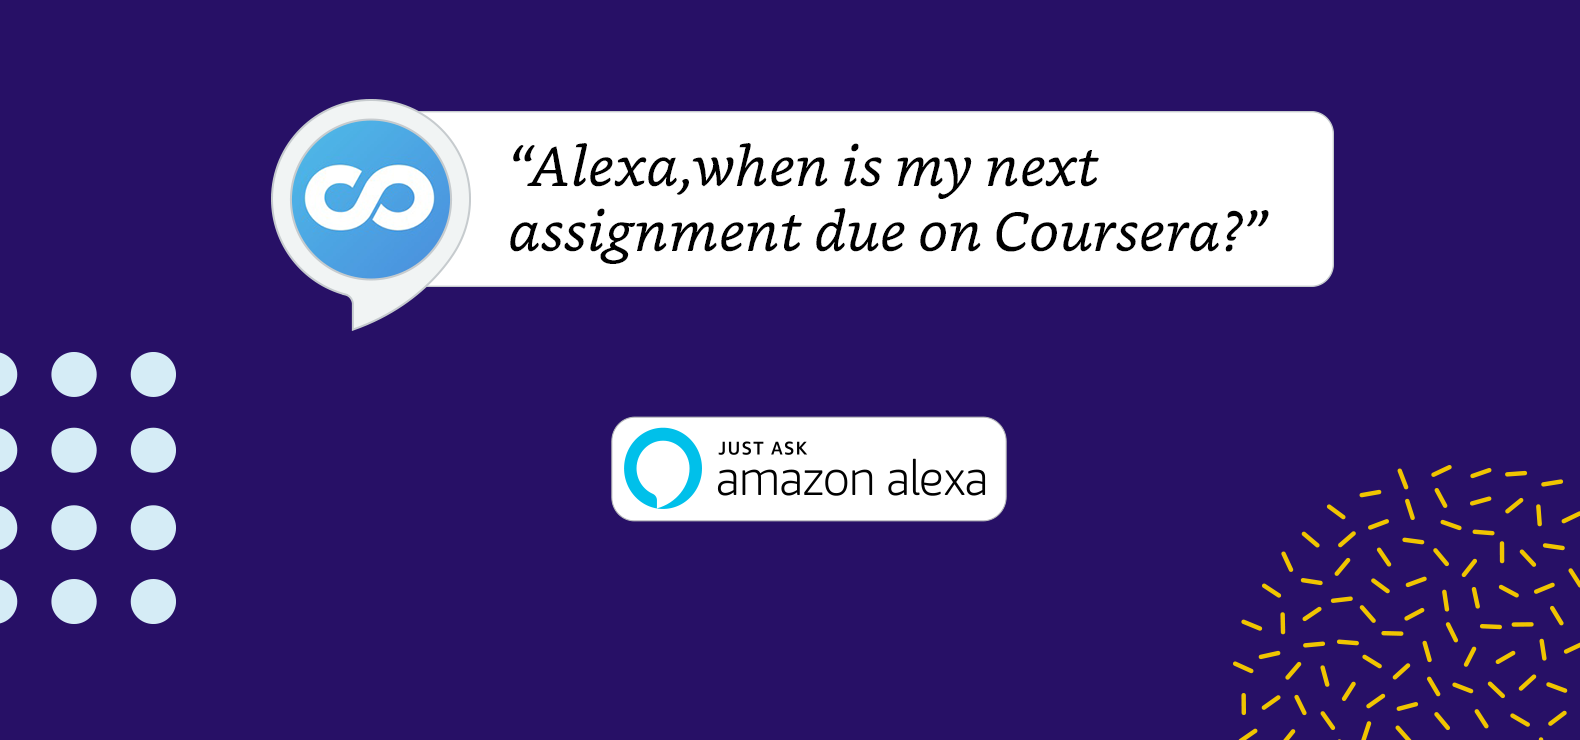 Coursera Introduces  Alexa Skill to Support Learning Goals - Coursera  Blog